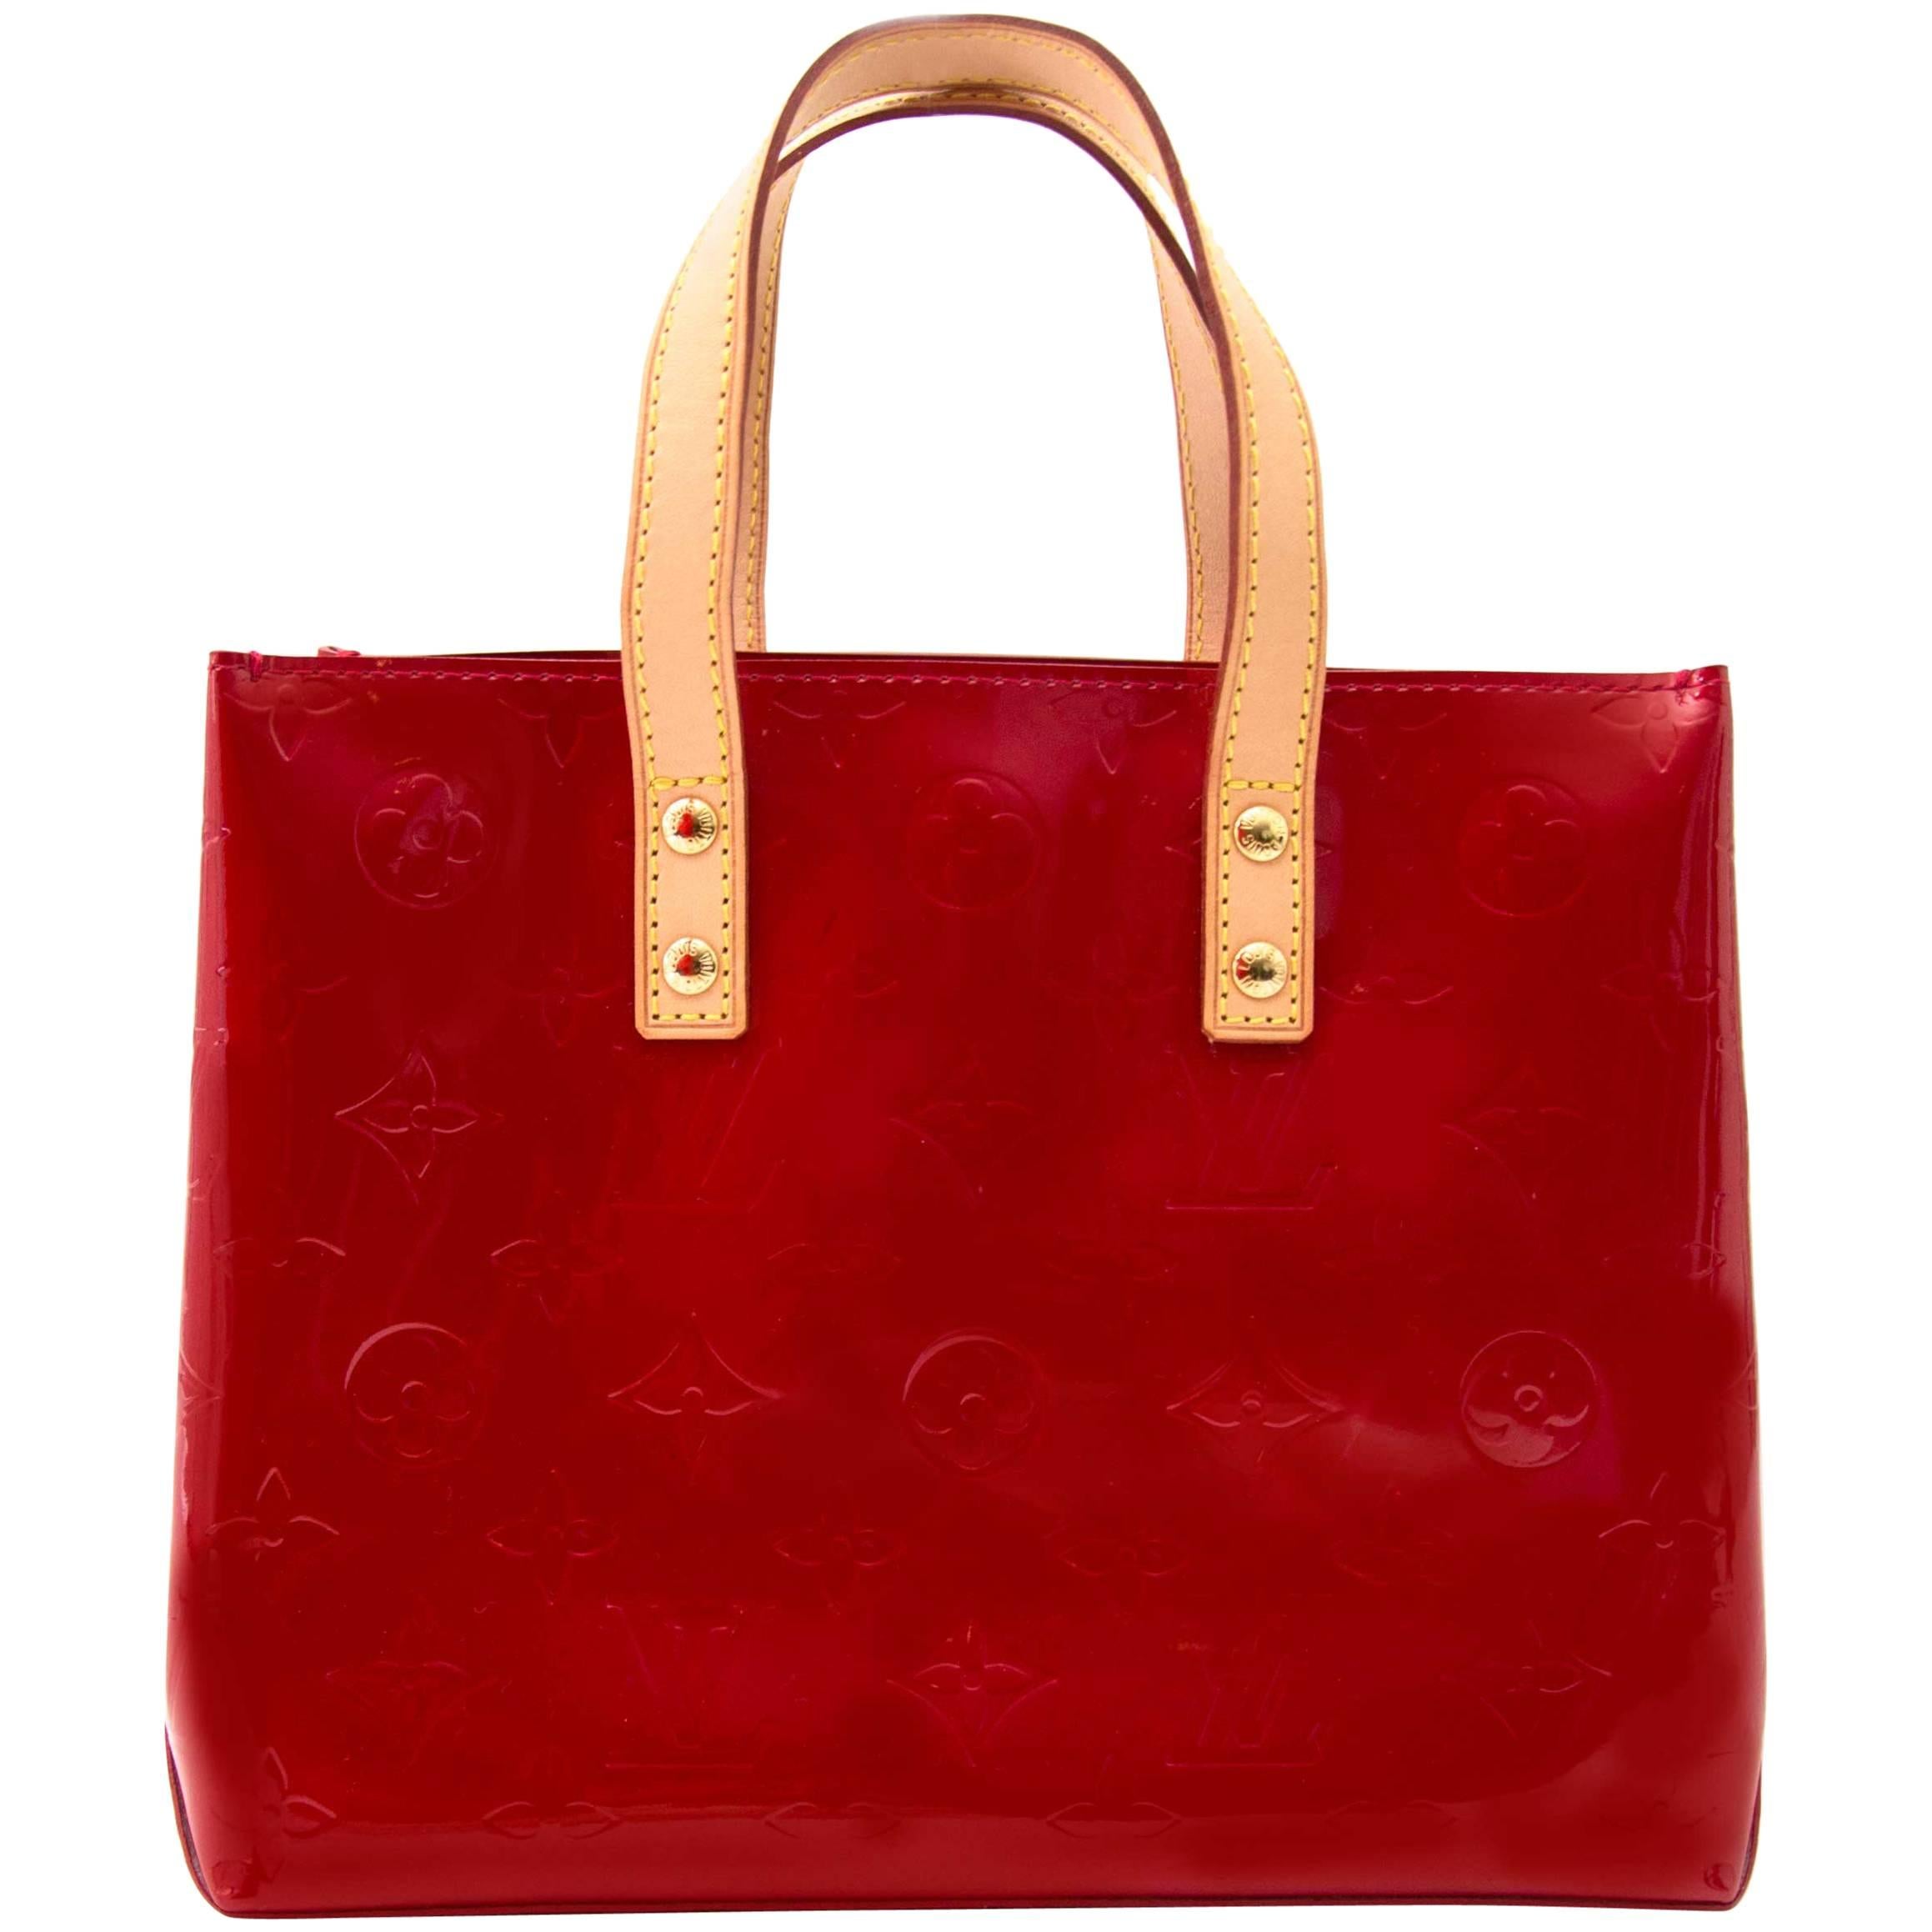 Louis Vuitton Mini Reade Red Vernis Leather Tote Bag